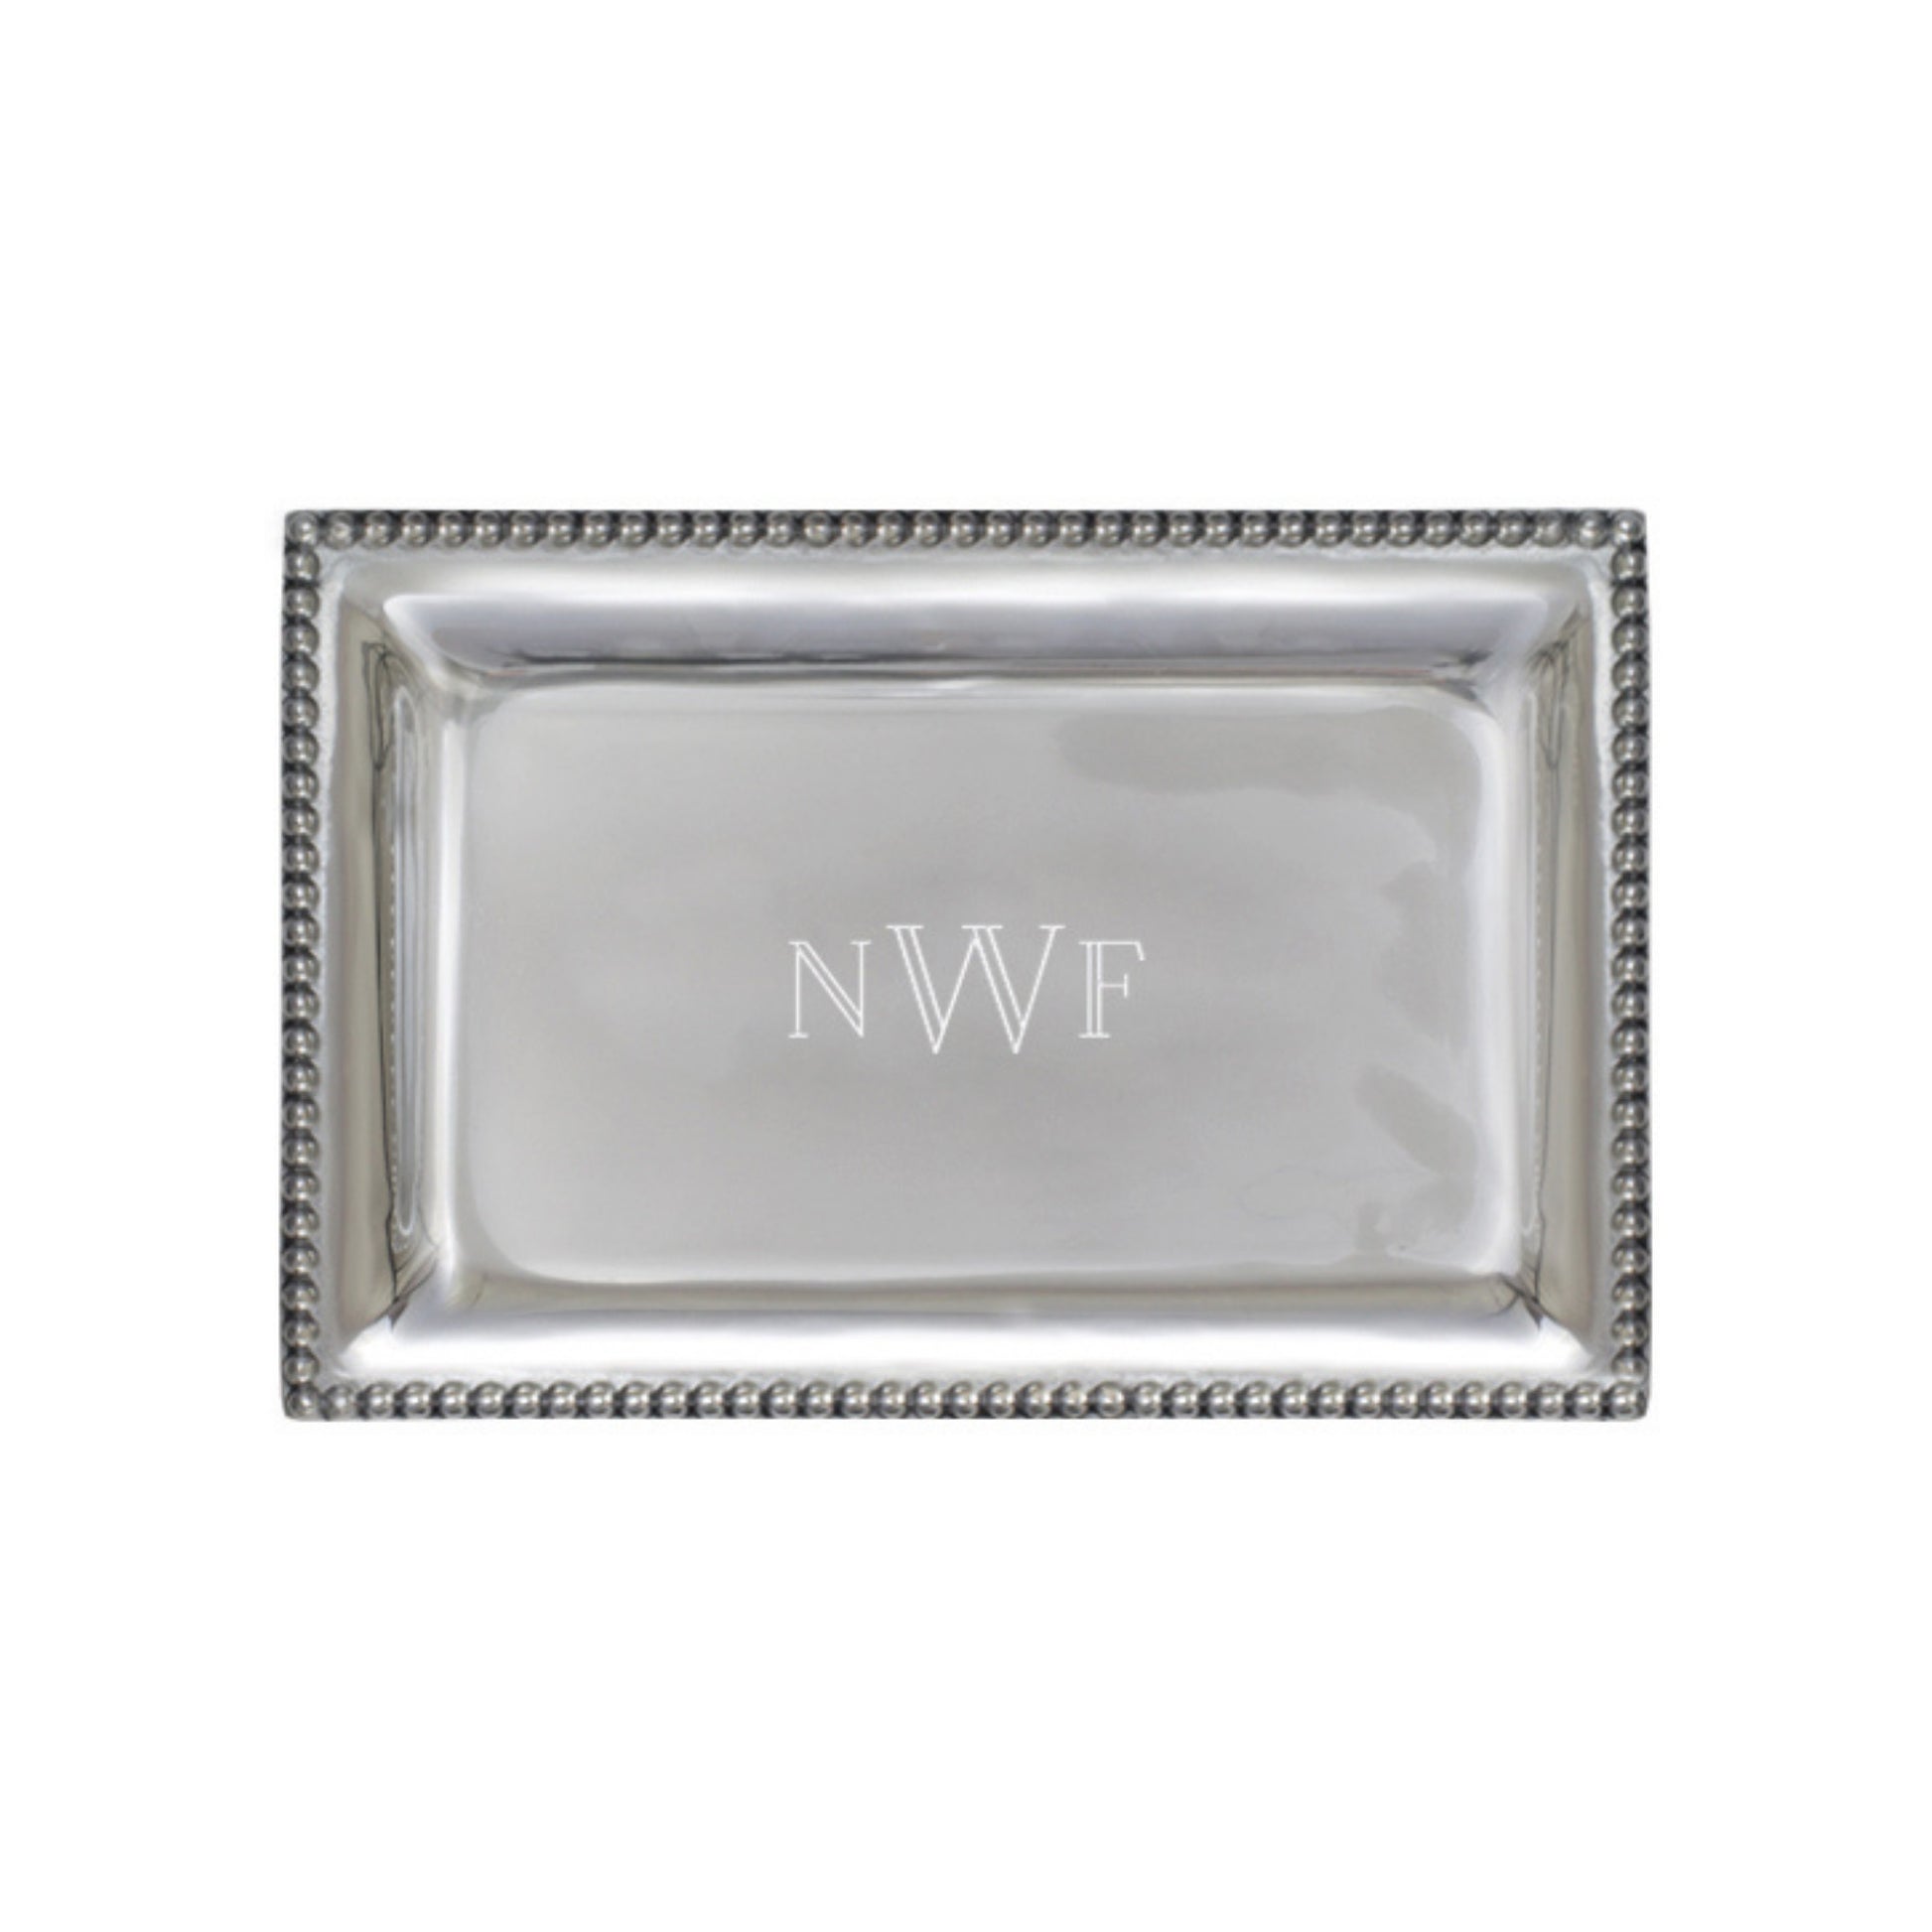 Templeton Silver Beaded Silver Vanity Tray showing engraving